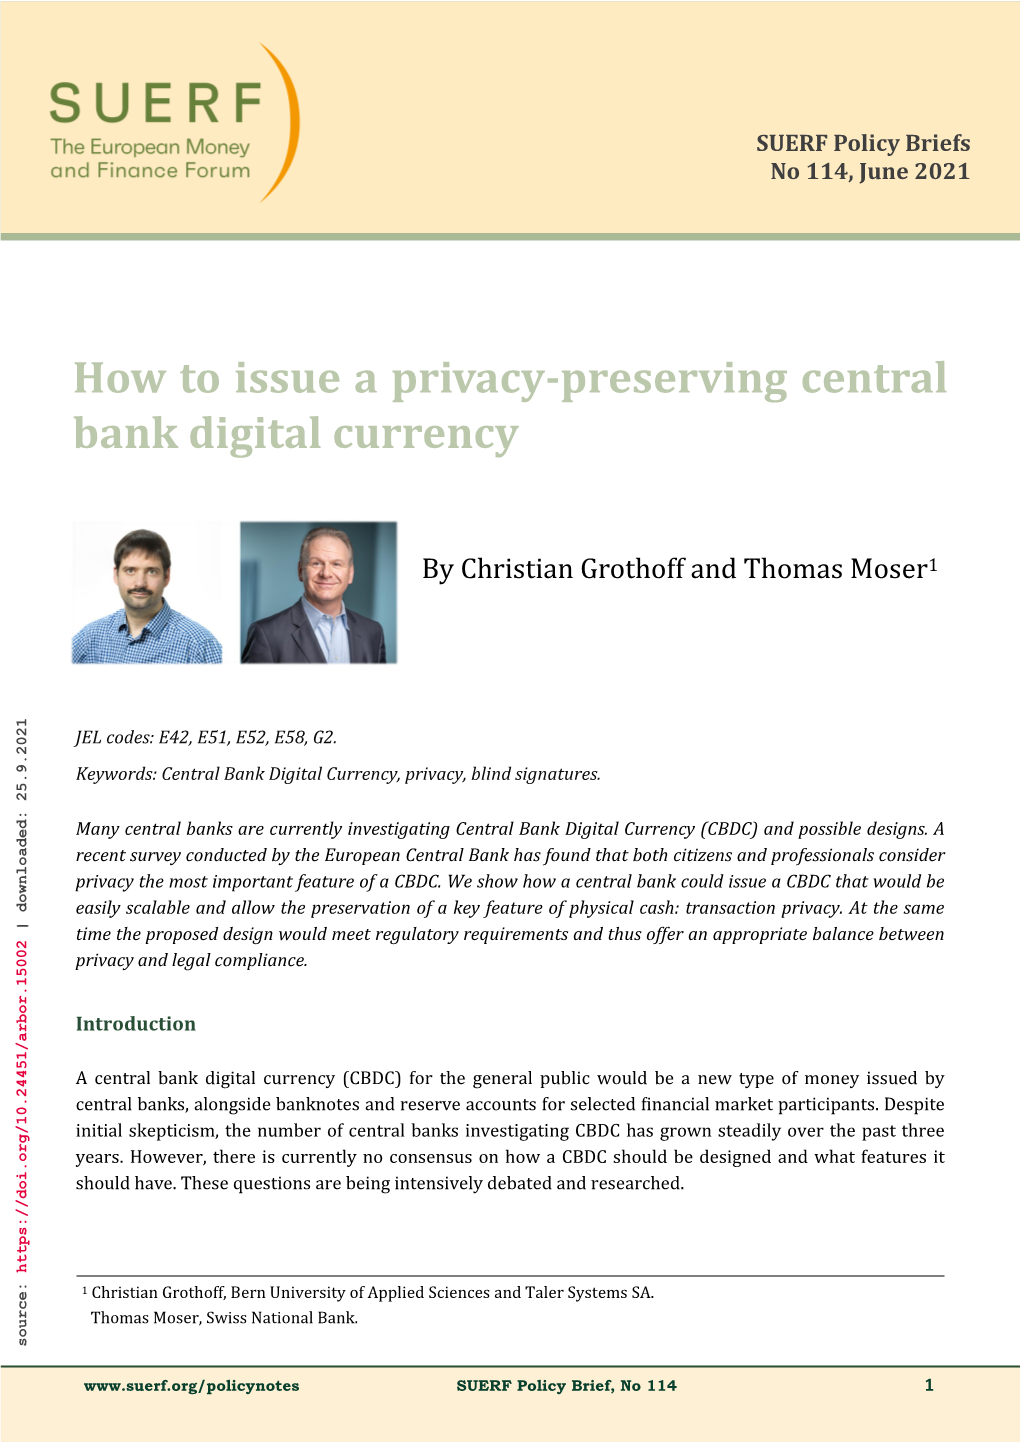 How to Issue a Privacy-Preserving Central Bank Digital Currency